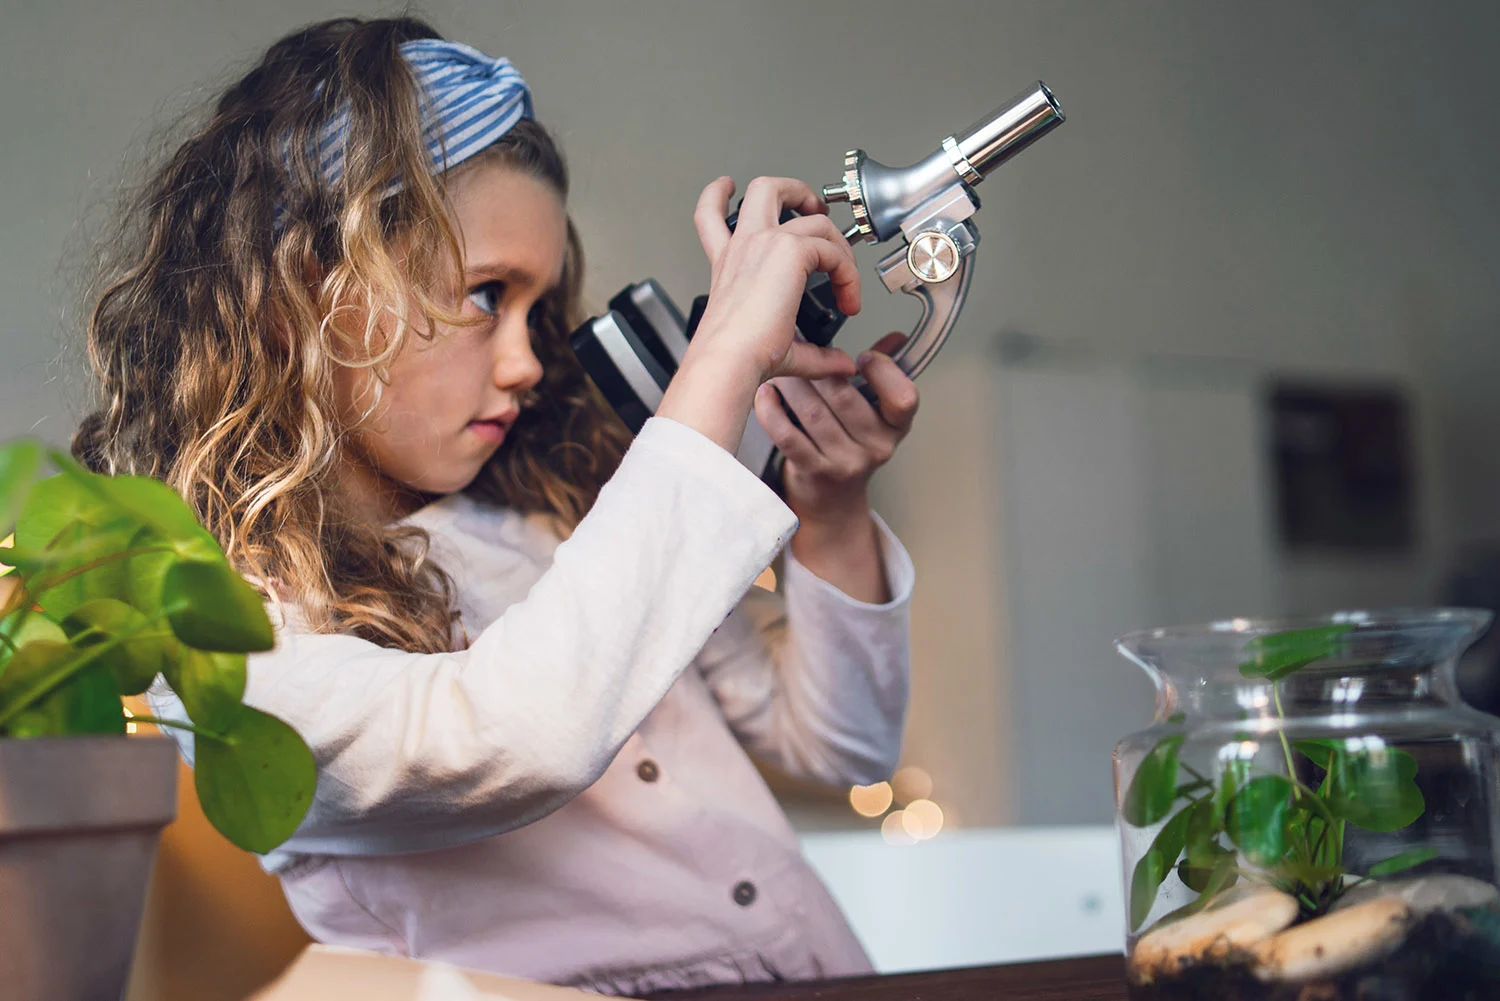 Girl looking at micro-telescope with plants on the table | Neste